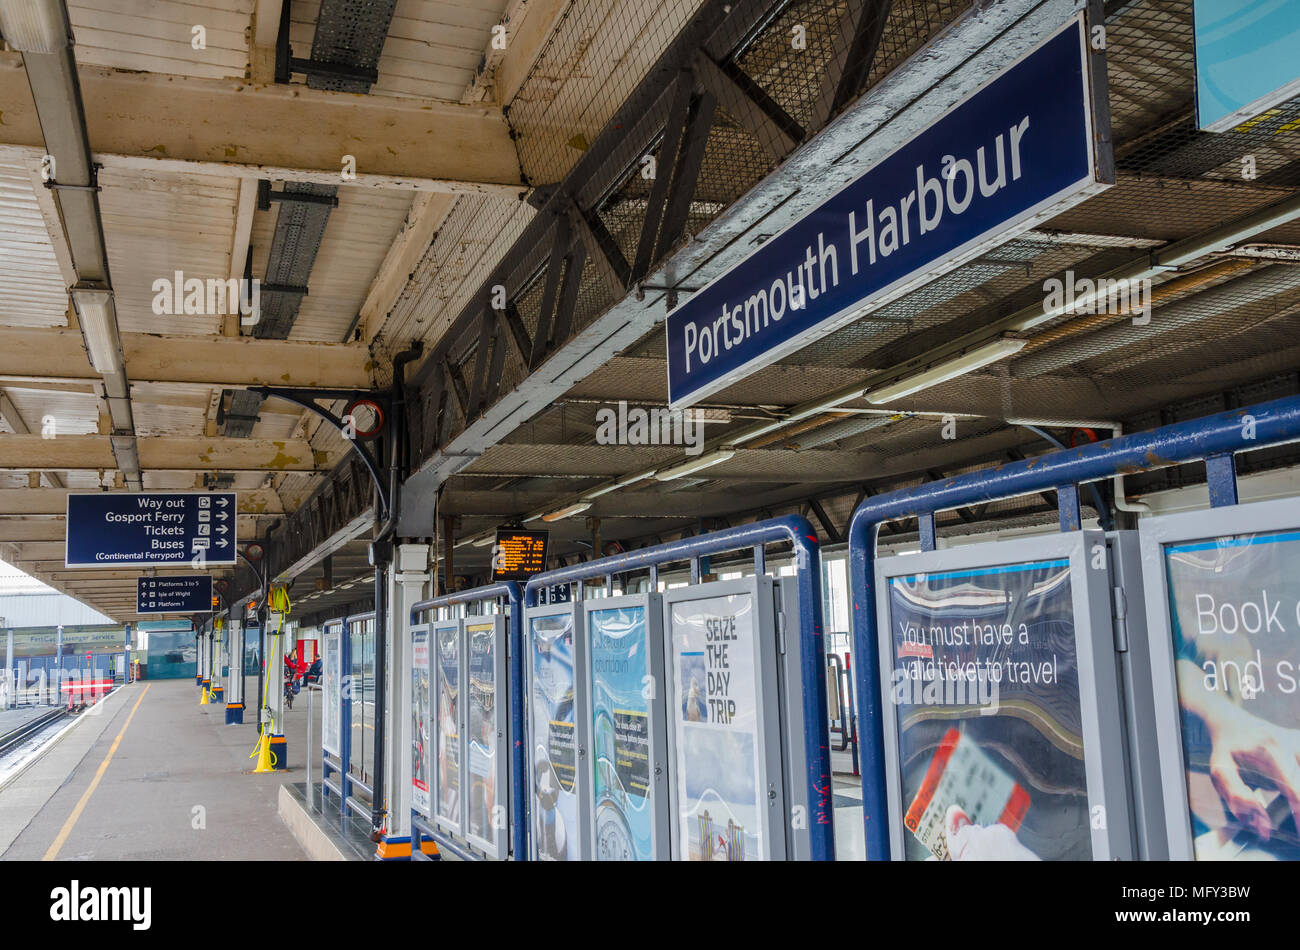 Signs and advertising boards on the platform at Portsmouth Harbour Railway Station. Stock Photo